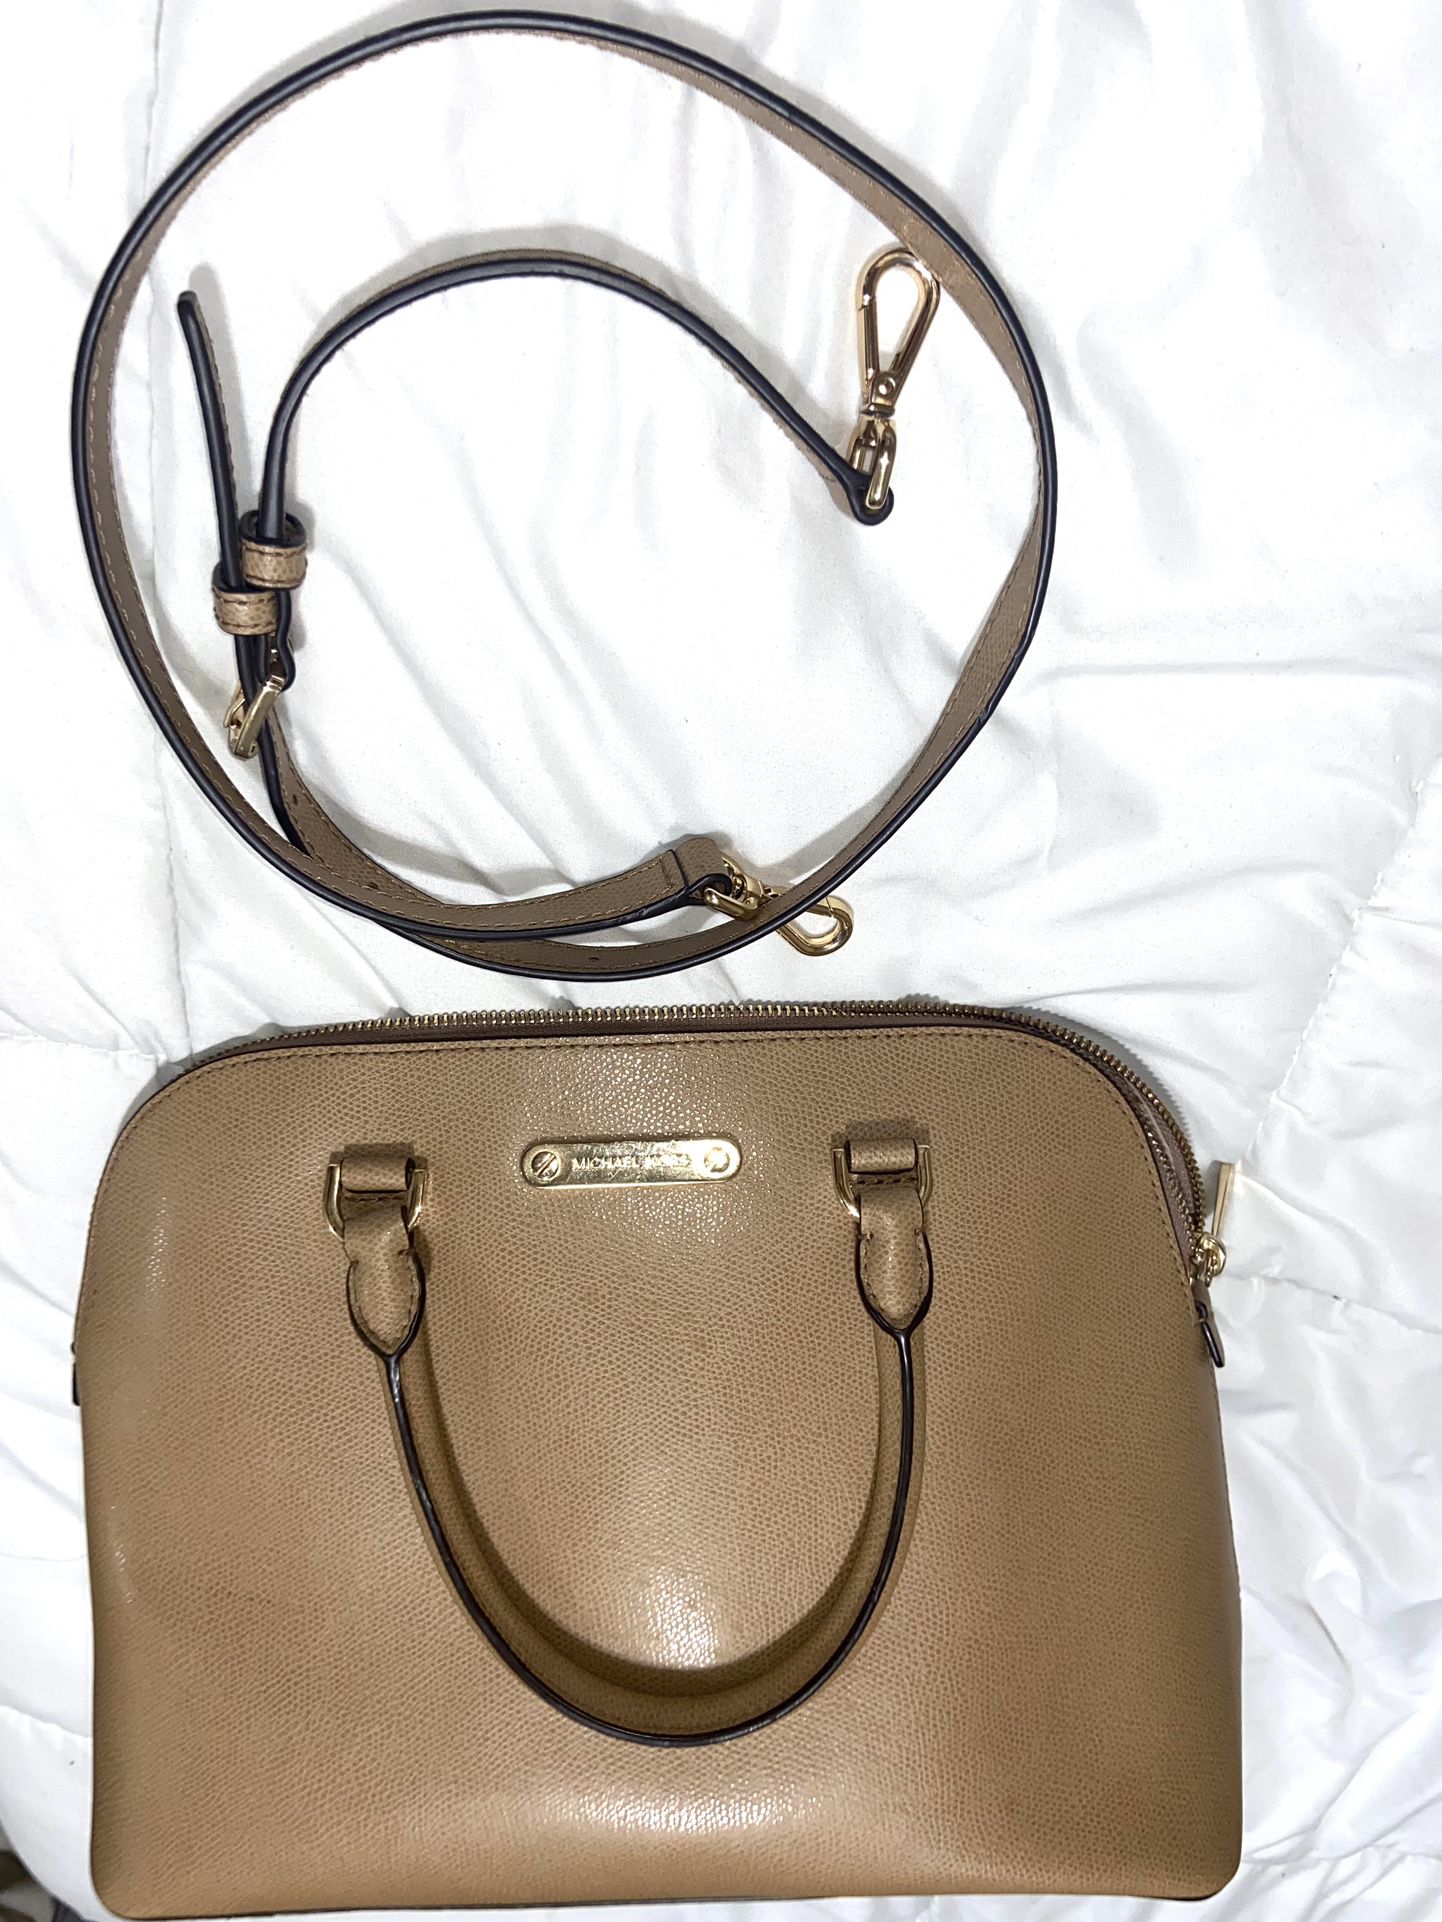 Michael Kors Purse Satchel With Shoulder Strap for Sale in Bloomington, CA  - OfferUp